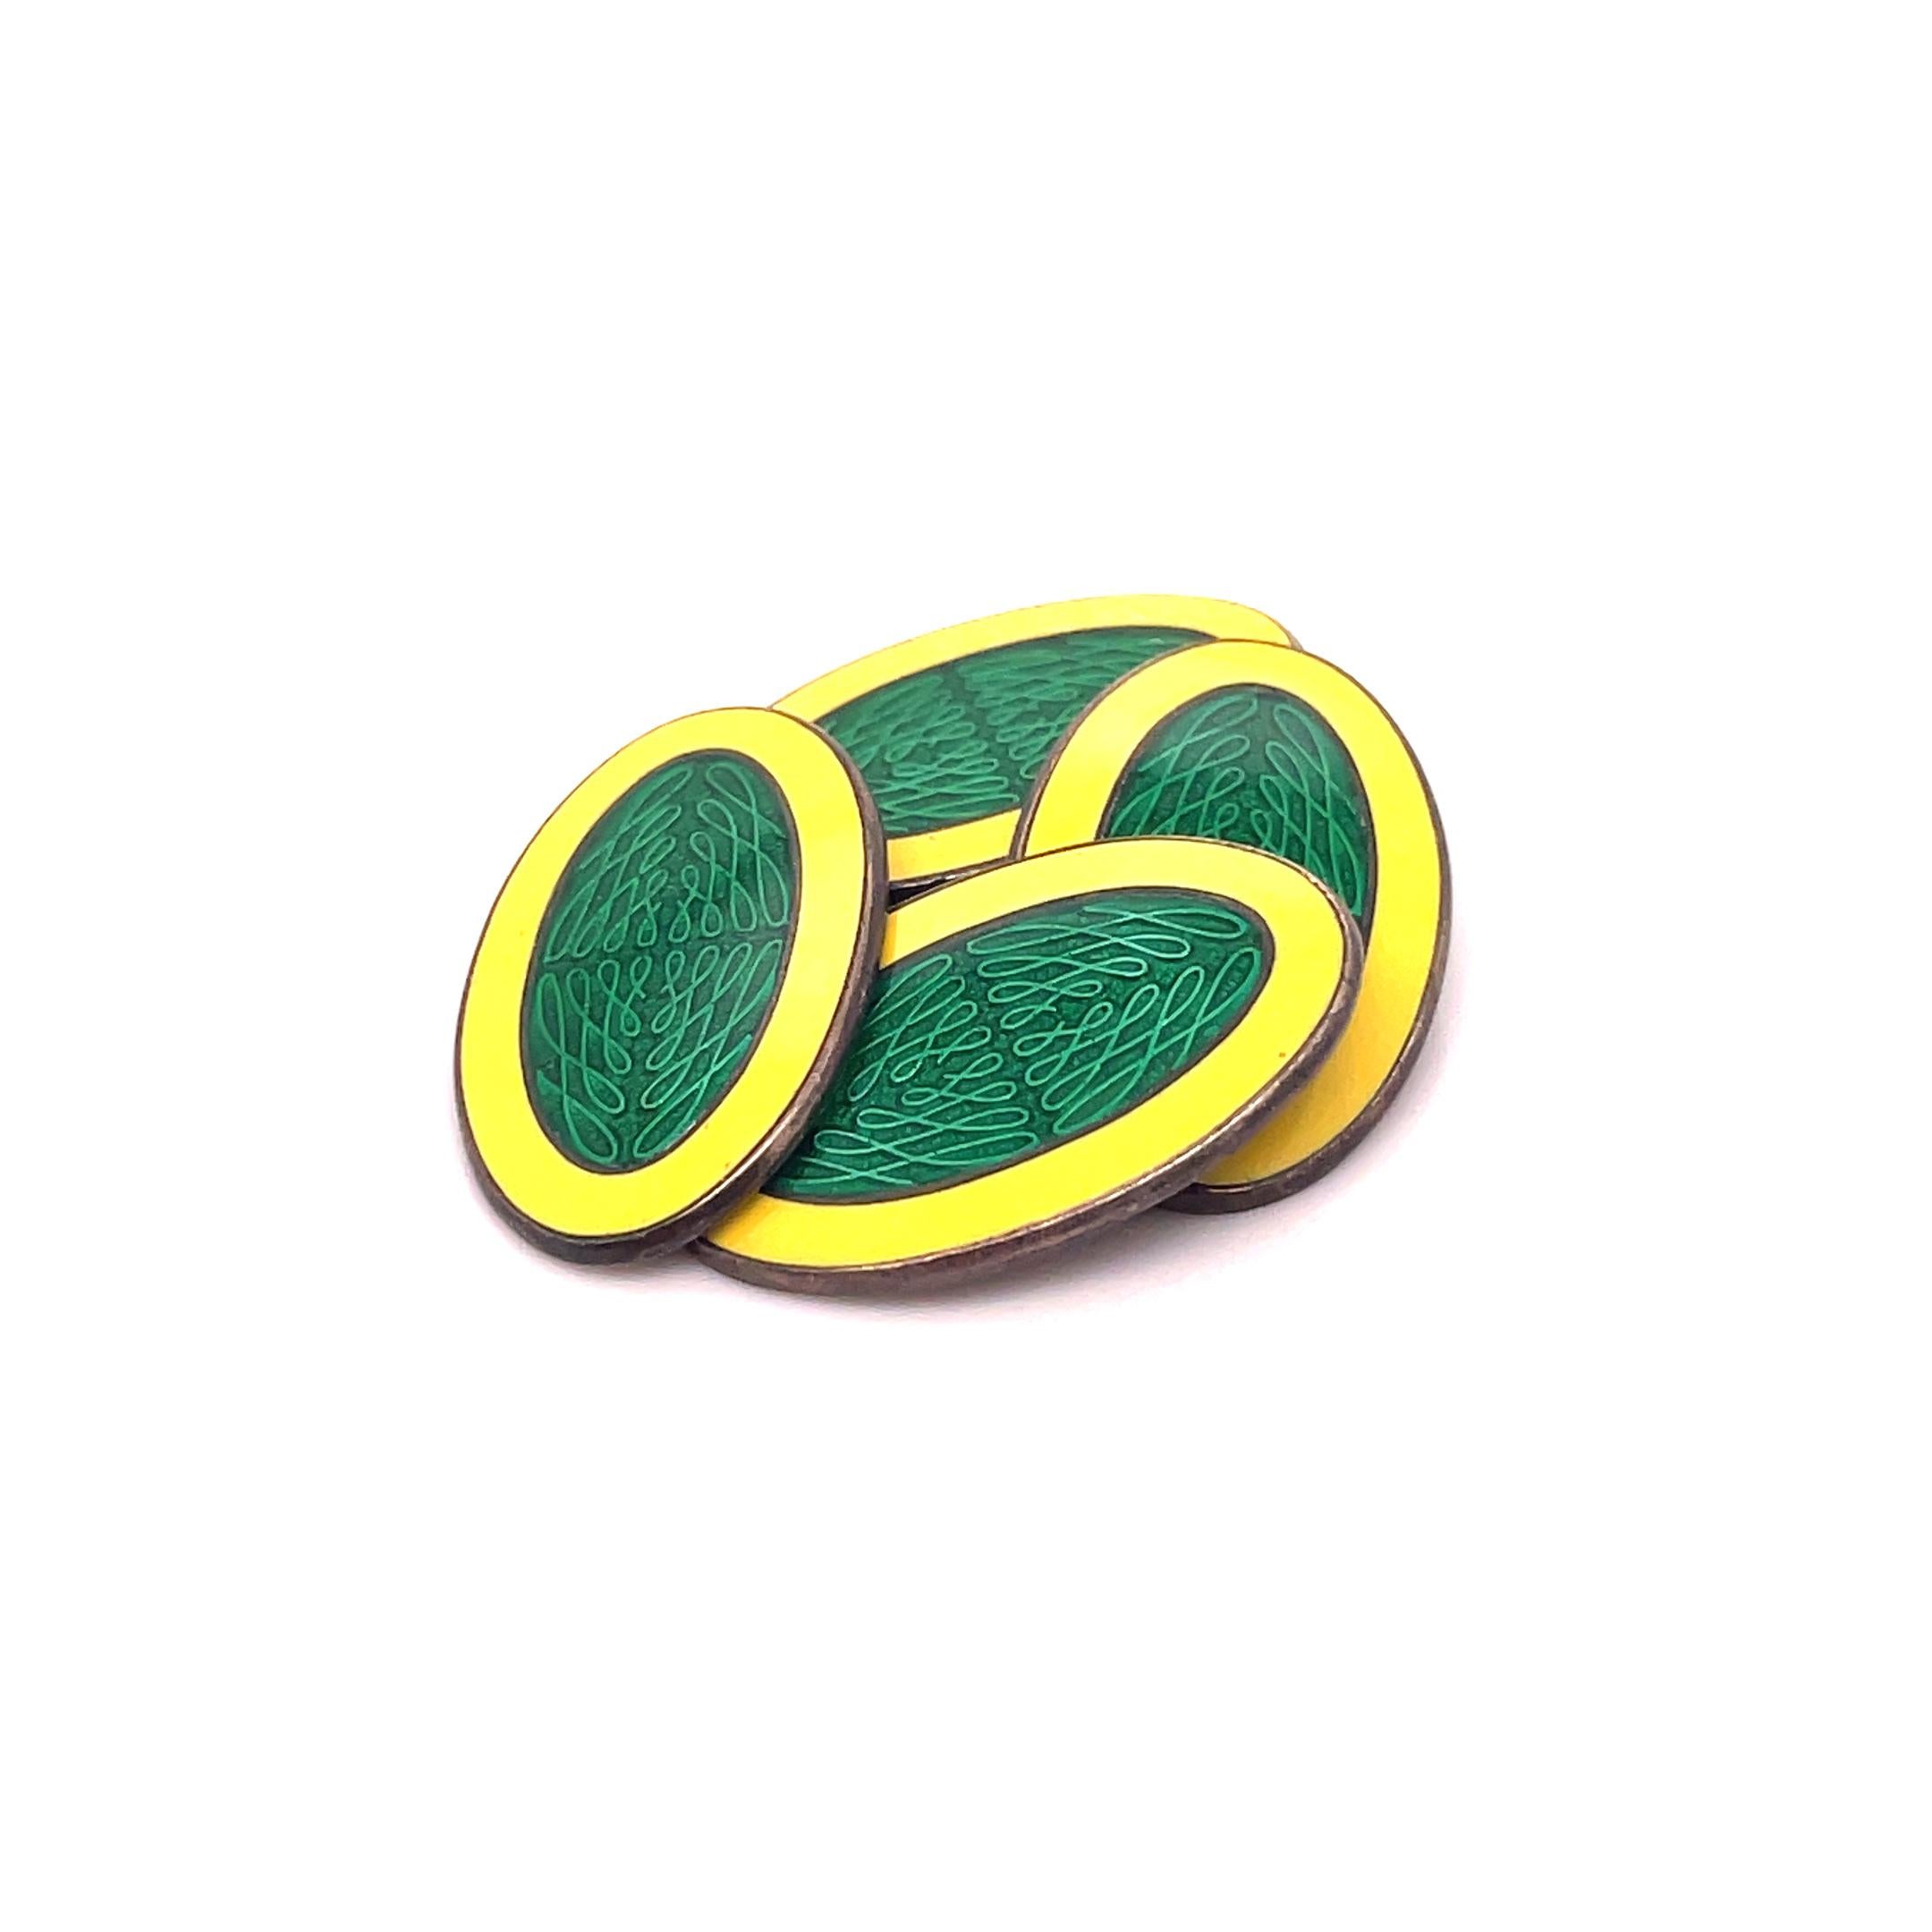 This is a remarkable pair of Art Deco cufflinks signed by Krementz that feature a stunning bright yellow frame and a strong dark green guilloche center. These cufflinks are signed by Krementz and marked Sterling. The shining yellow frame against the